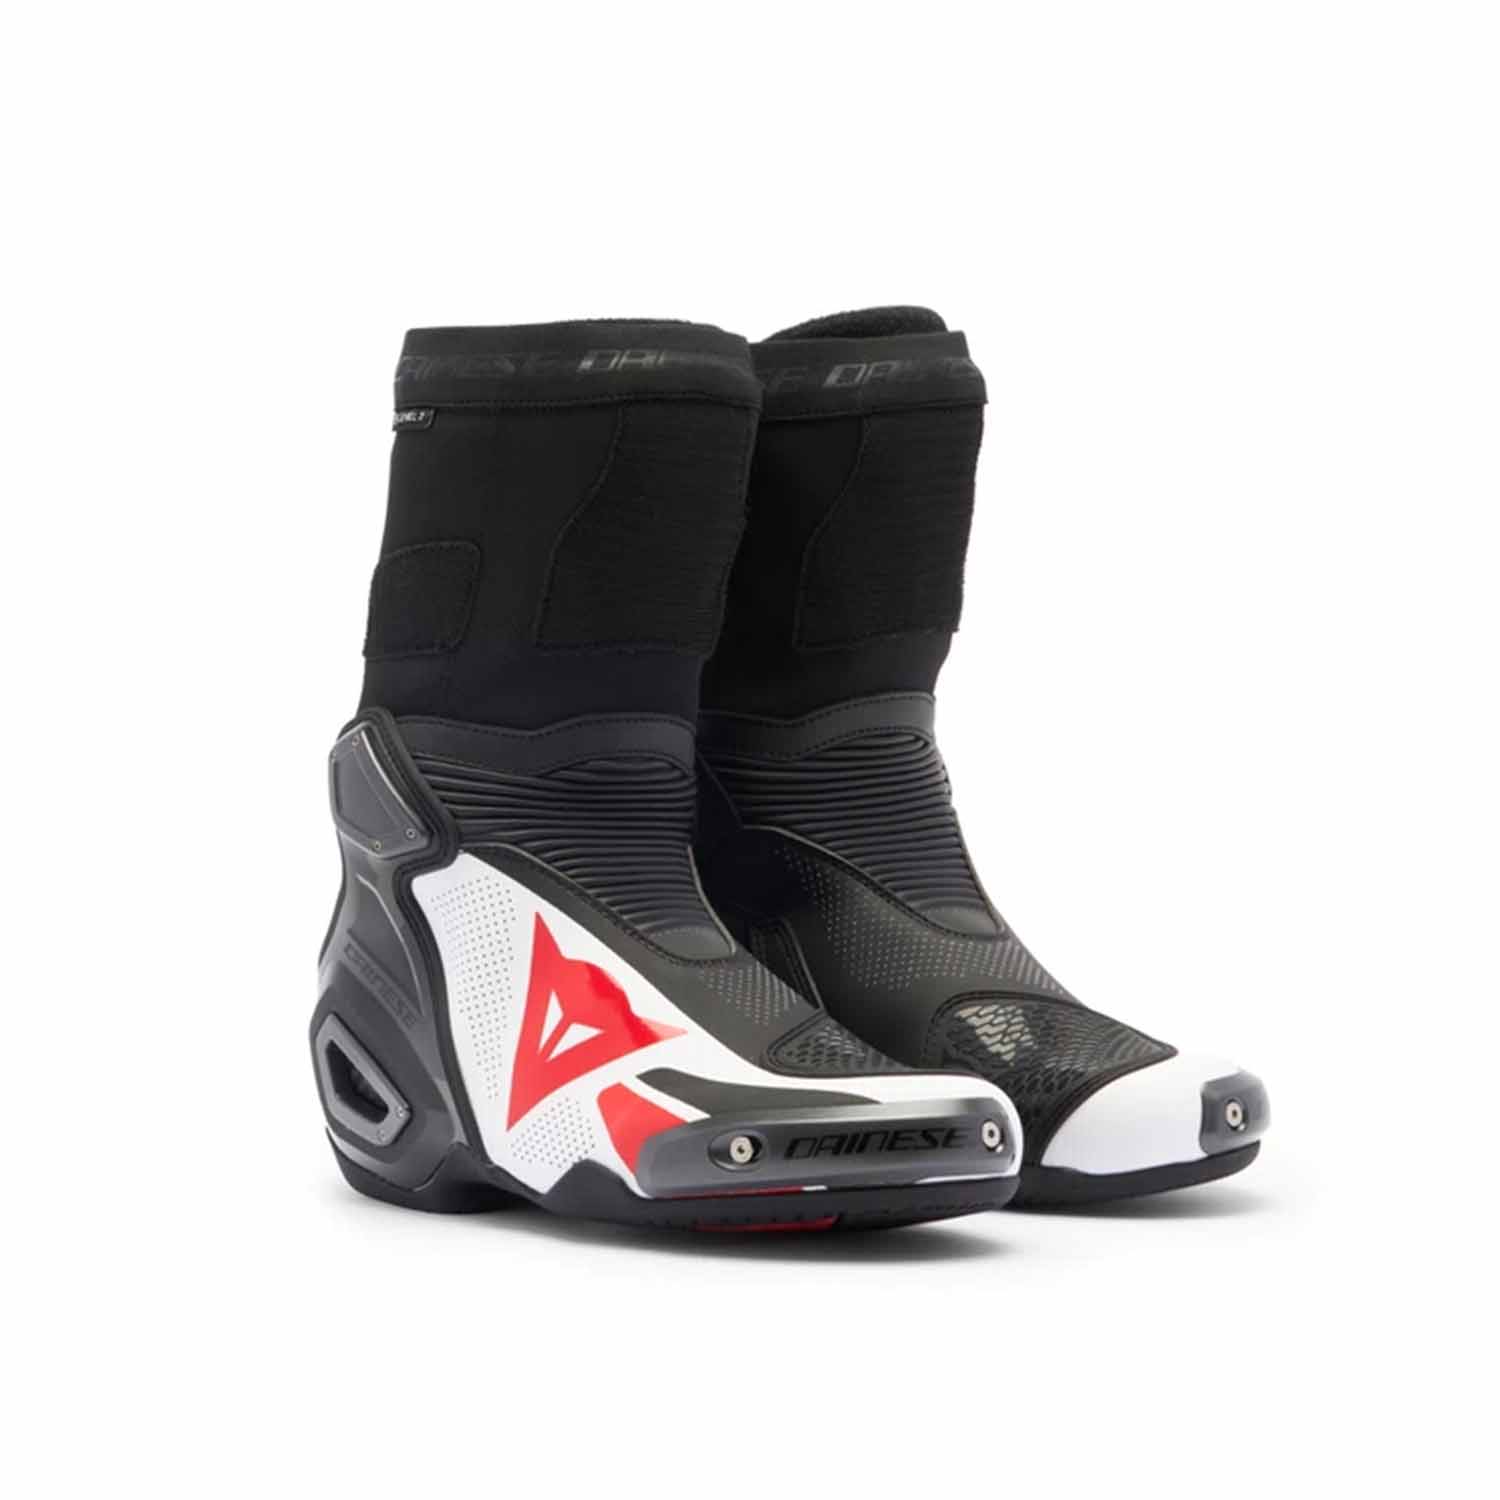 Image of Dainese Axial 2 Air Boots Black White Lava Red Größe 41